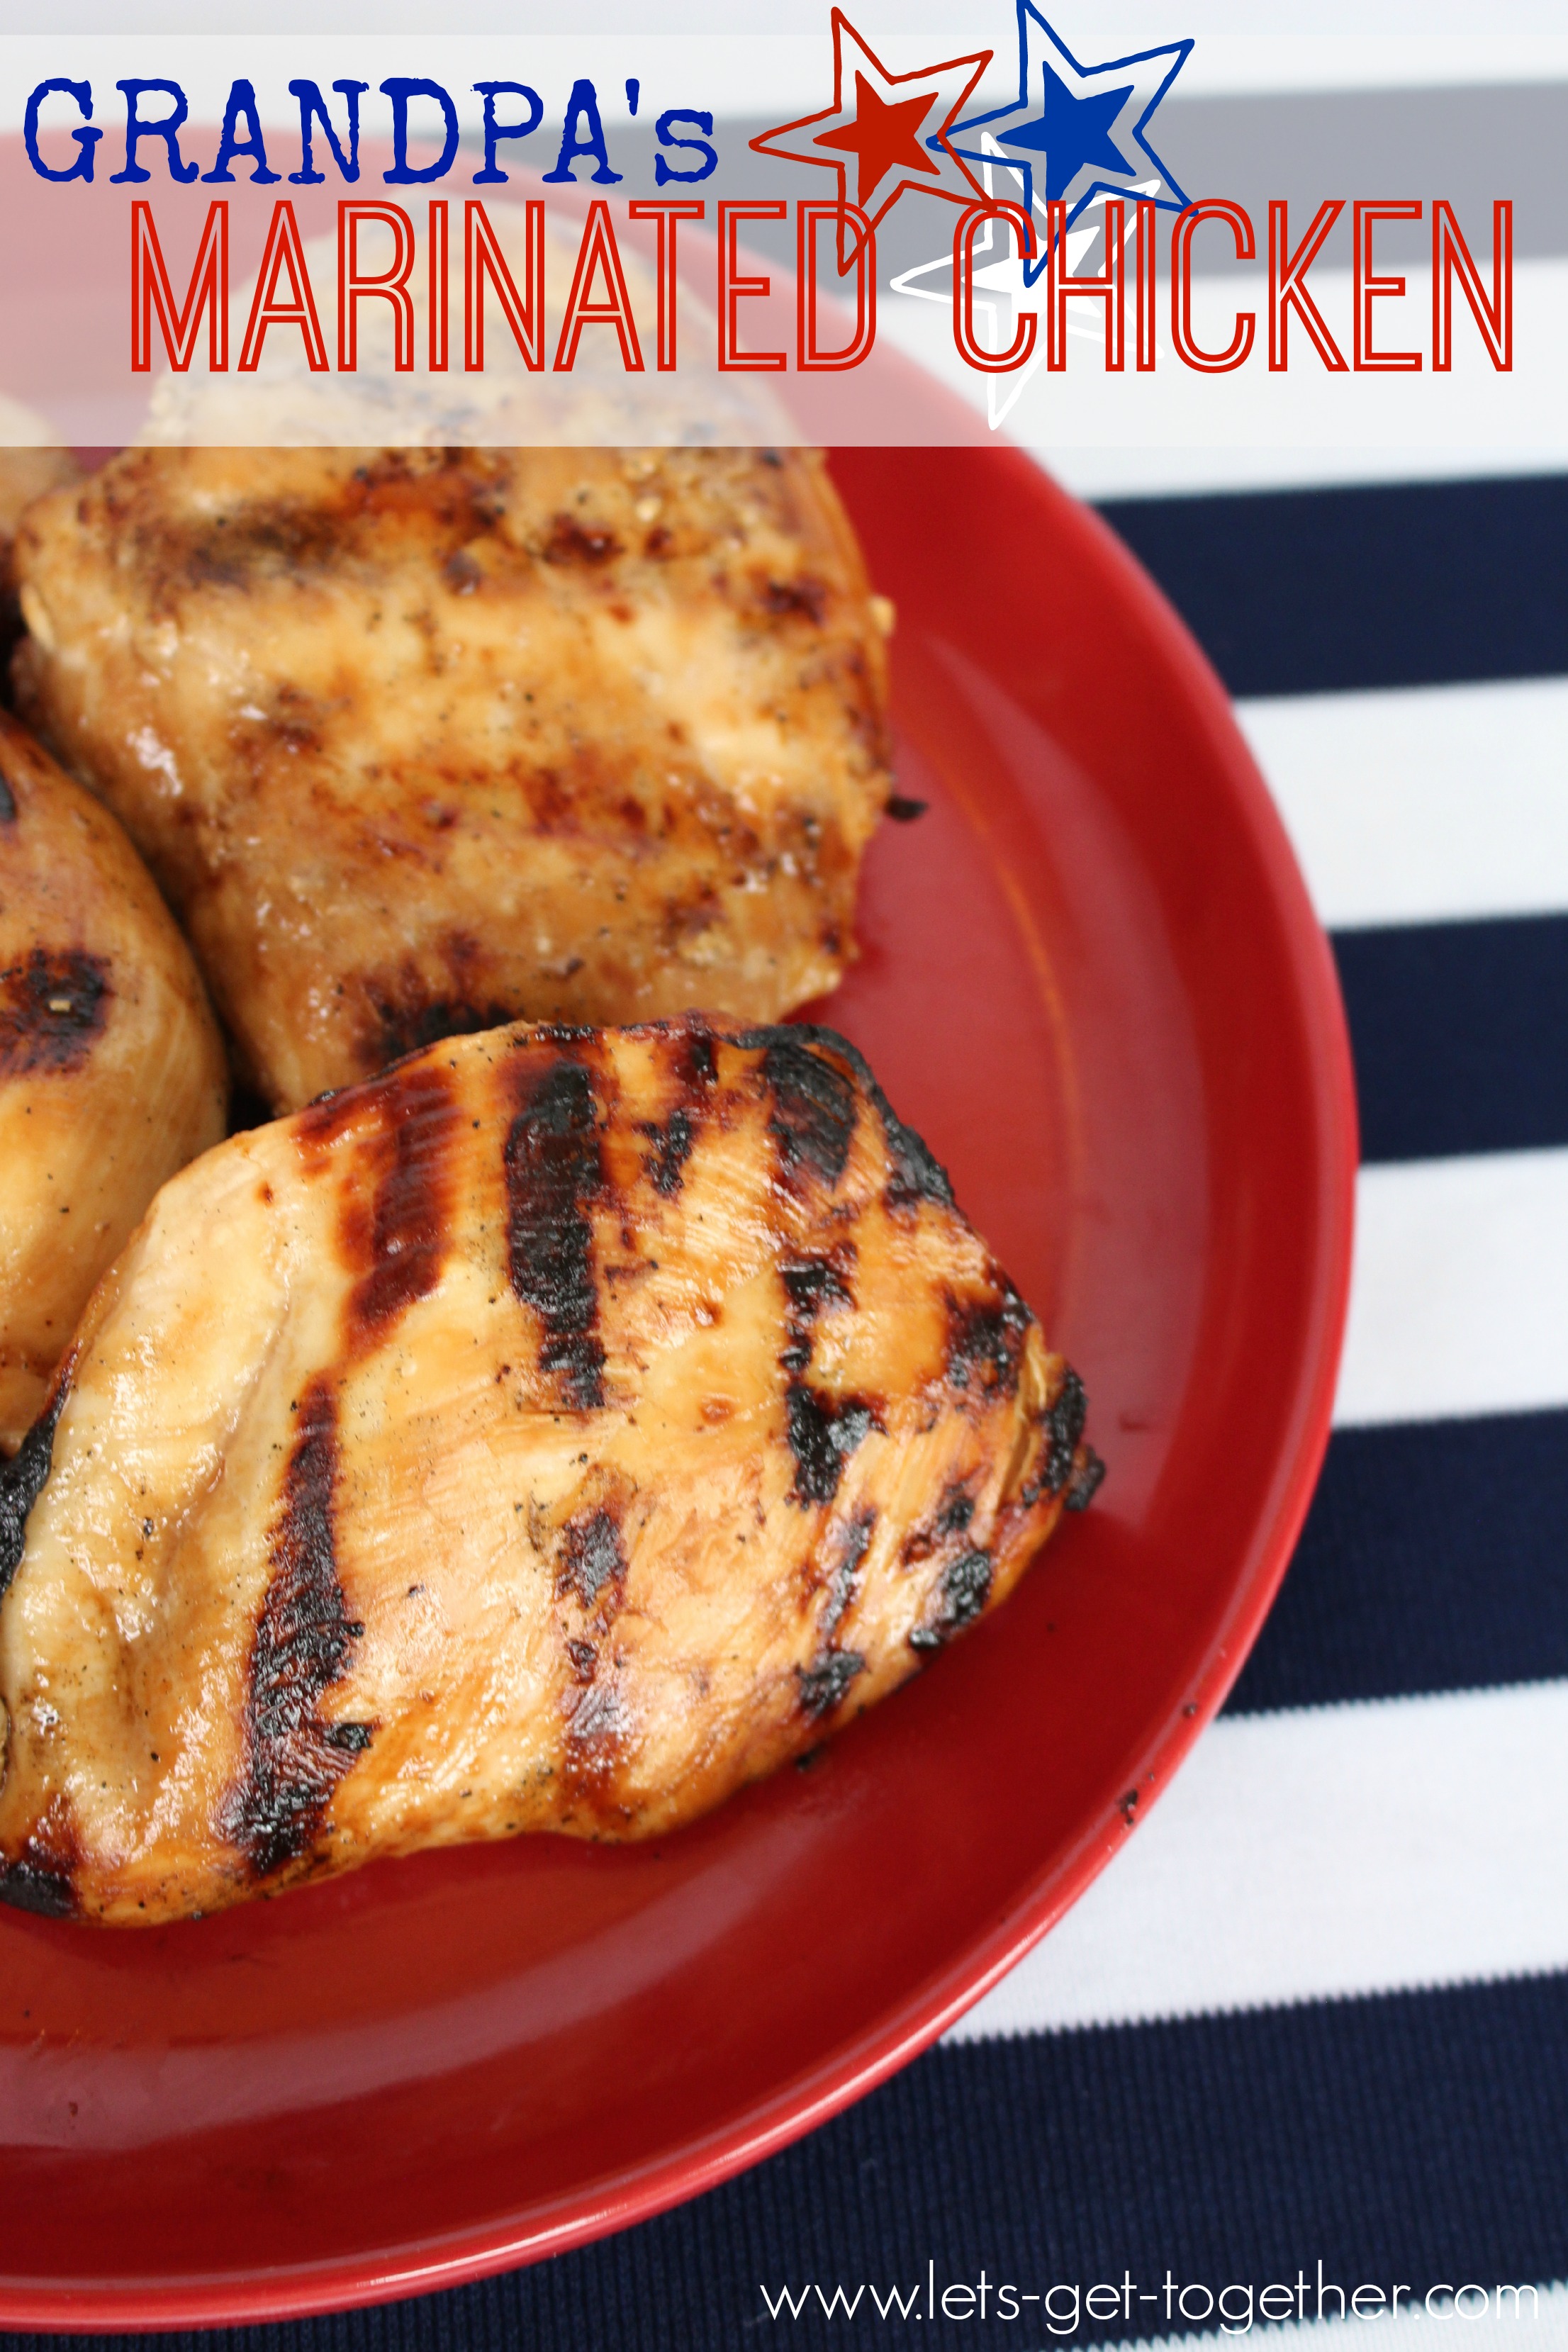 Marinated Chicken from Let's Get Together